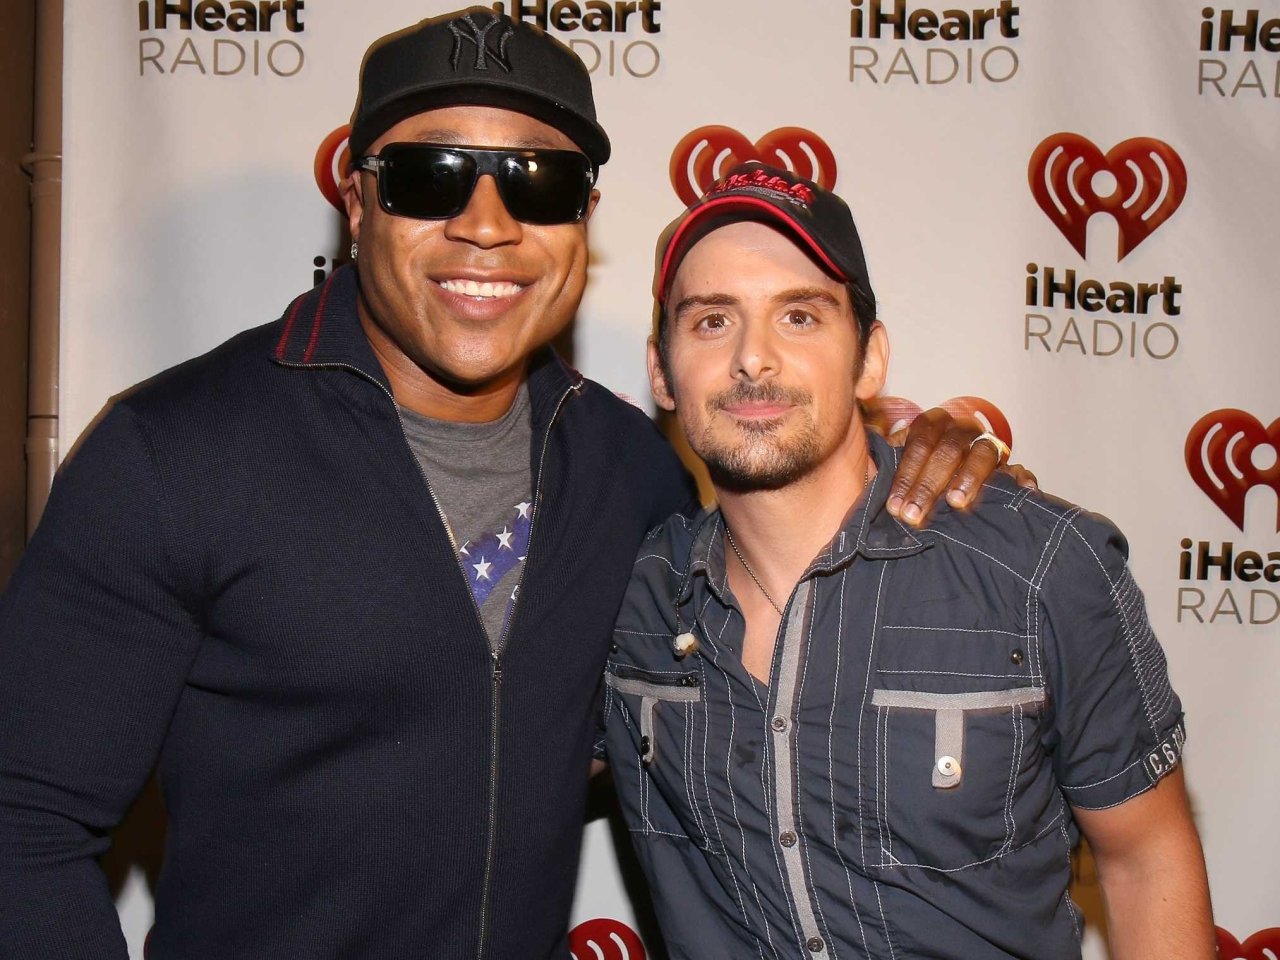 The 11 Worst Lines in Brad Paisley and LL Cool J’s ‘Accidental Racist’
The controversial collaboration between country singer Brad Paisley and rapper LL Cool J has caused a stir for its bafflingly simple-minded take on racism, slavery and southern...